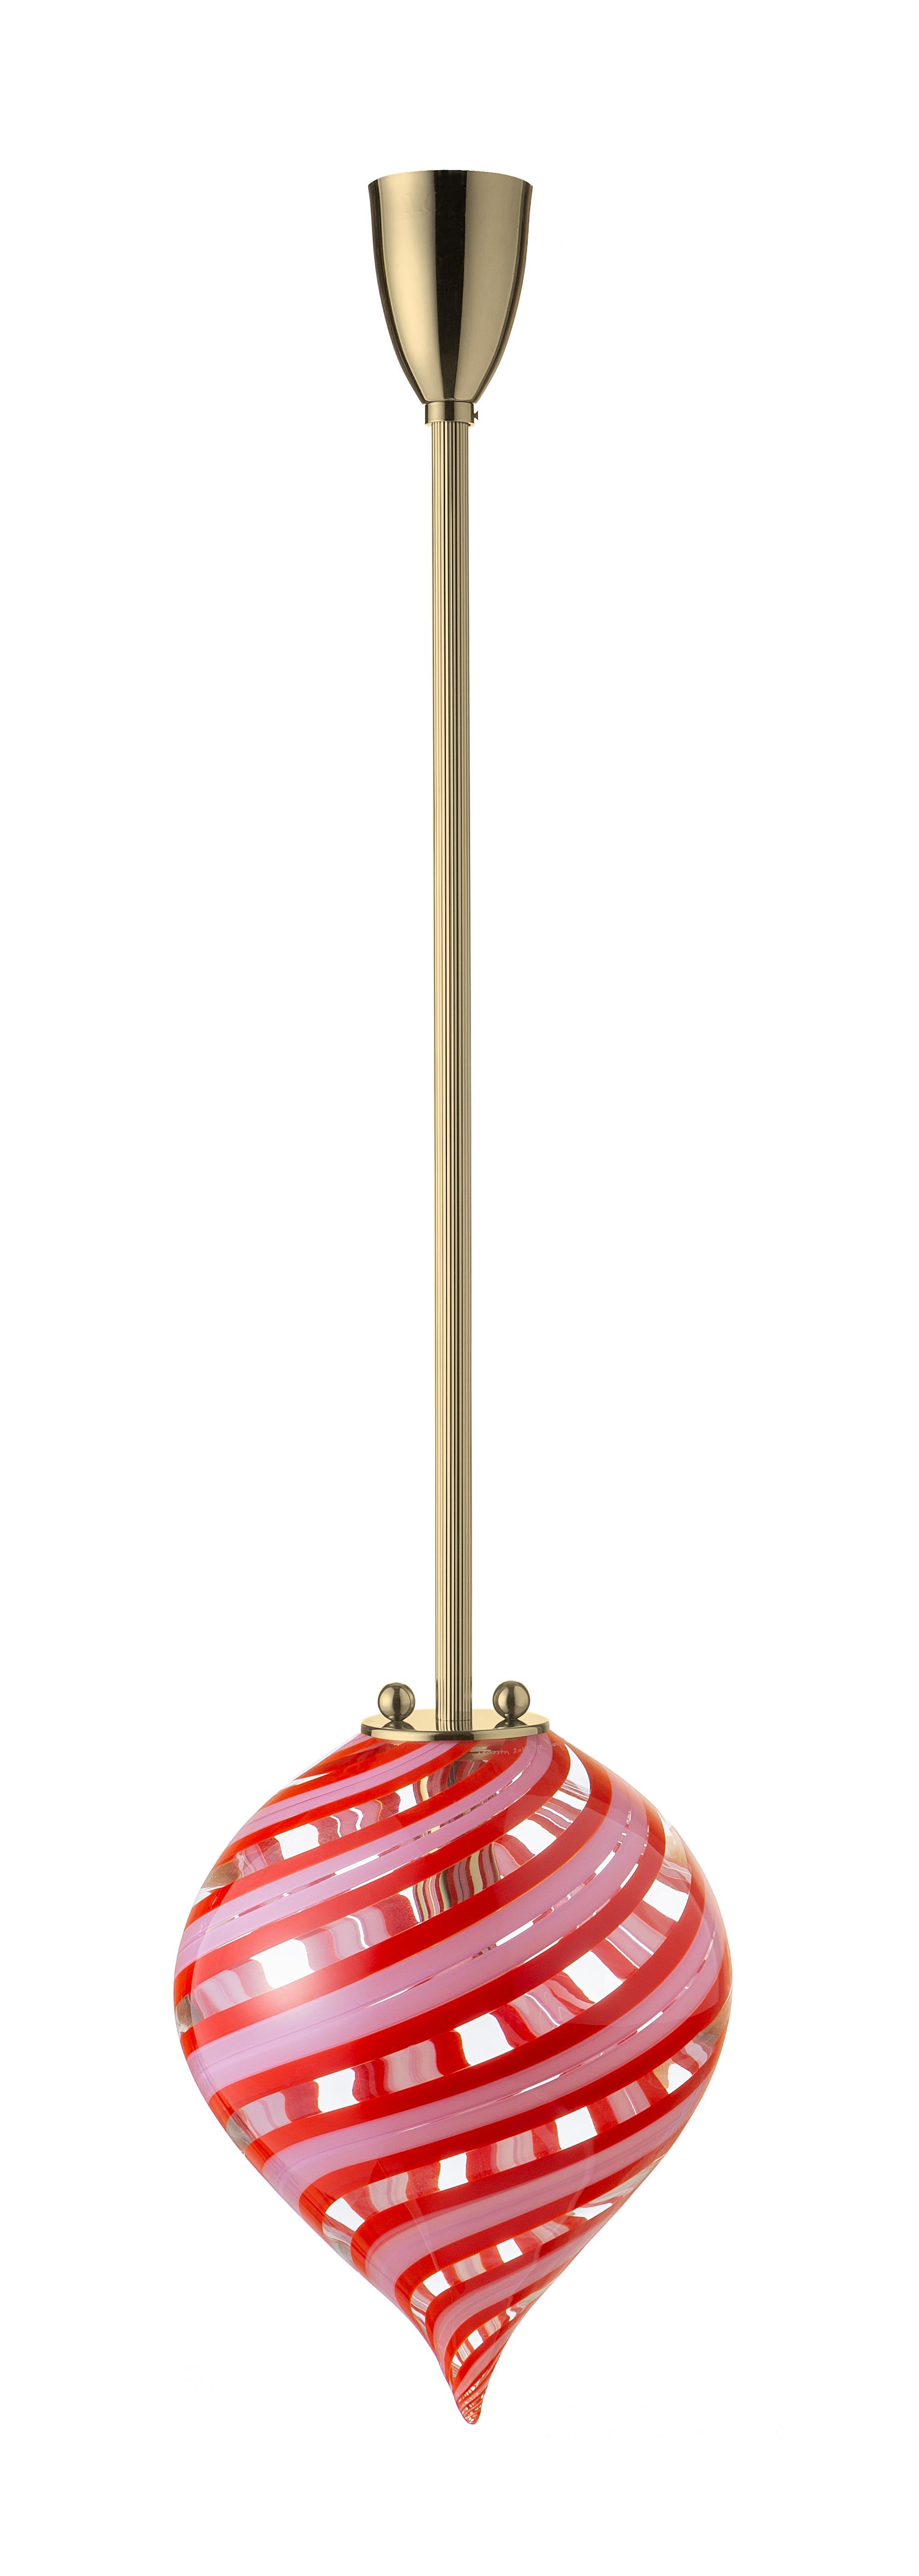 Rosa Rosso pendant Balloon Canne by Magic Circus Editions
Dimensions: H 36 x W 27 x D 27 cm
Materials: fluted brass, mouth-blown glass
Colour: viola

Available finishes: Brass, nickel
Available colours: rosa rosso, senape bianco, blu, senape